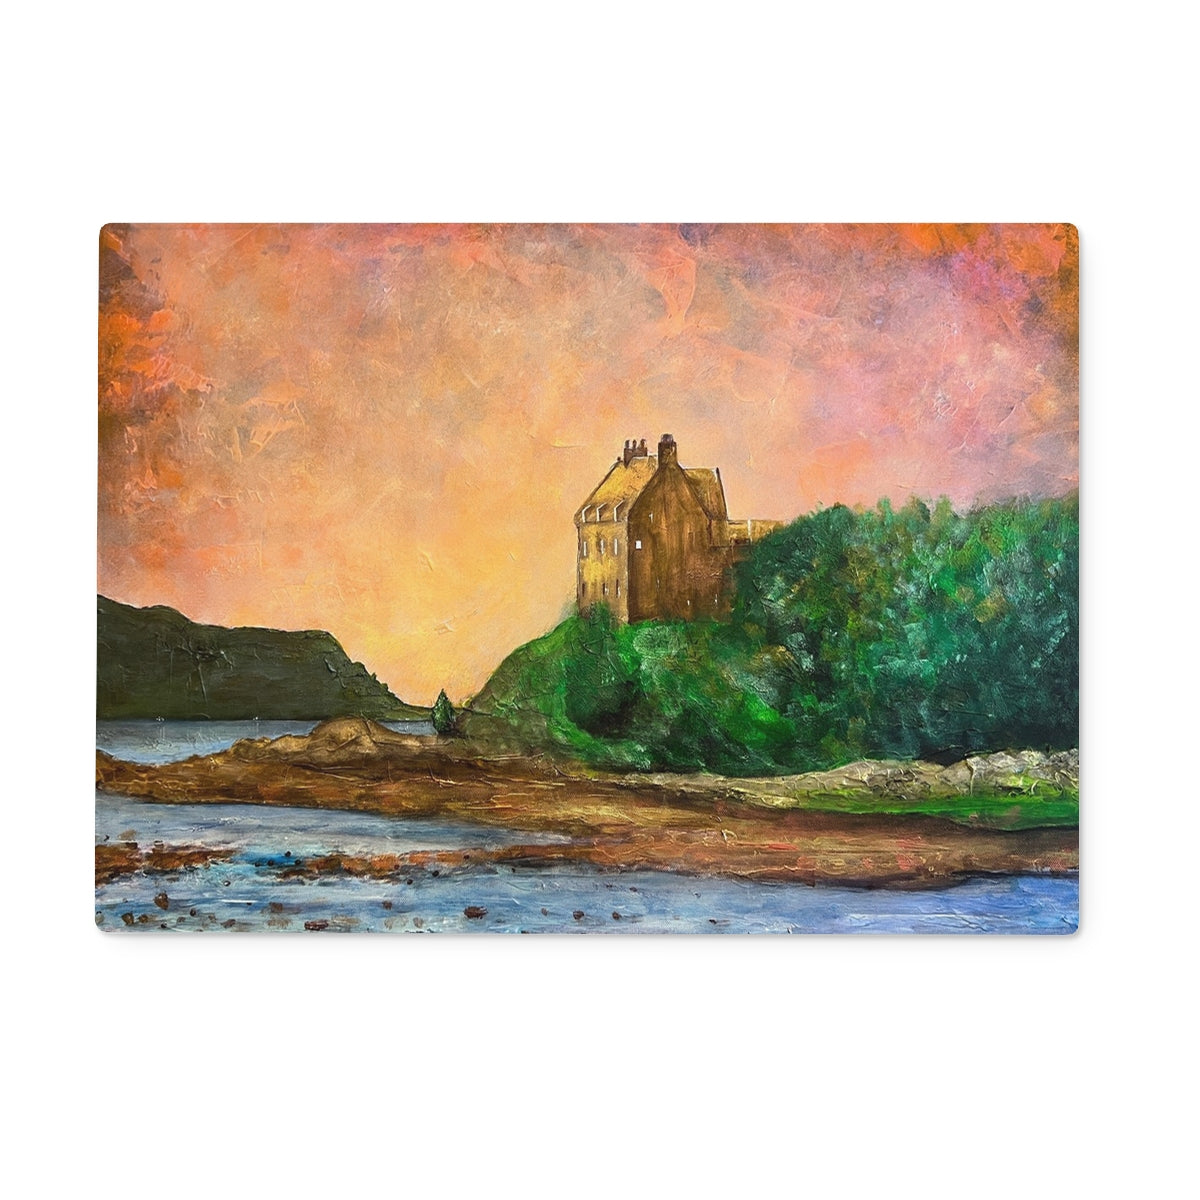 Duntrune Castle Art Gifts Glass Chopping Board-Glass Chopping Boards-Historic & Iconic Scotland Art Gallery-15"x11" Rectangular-Paintings, Prints, Homeware, Art Gifts From Scotland By Scottish Artist Kevin Hunter